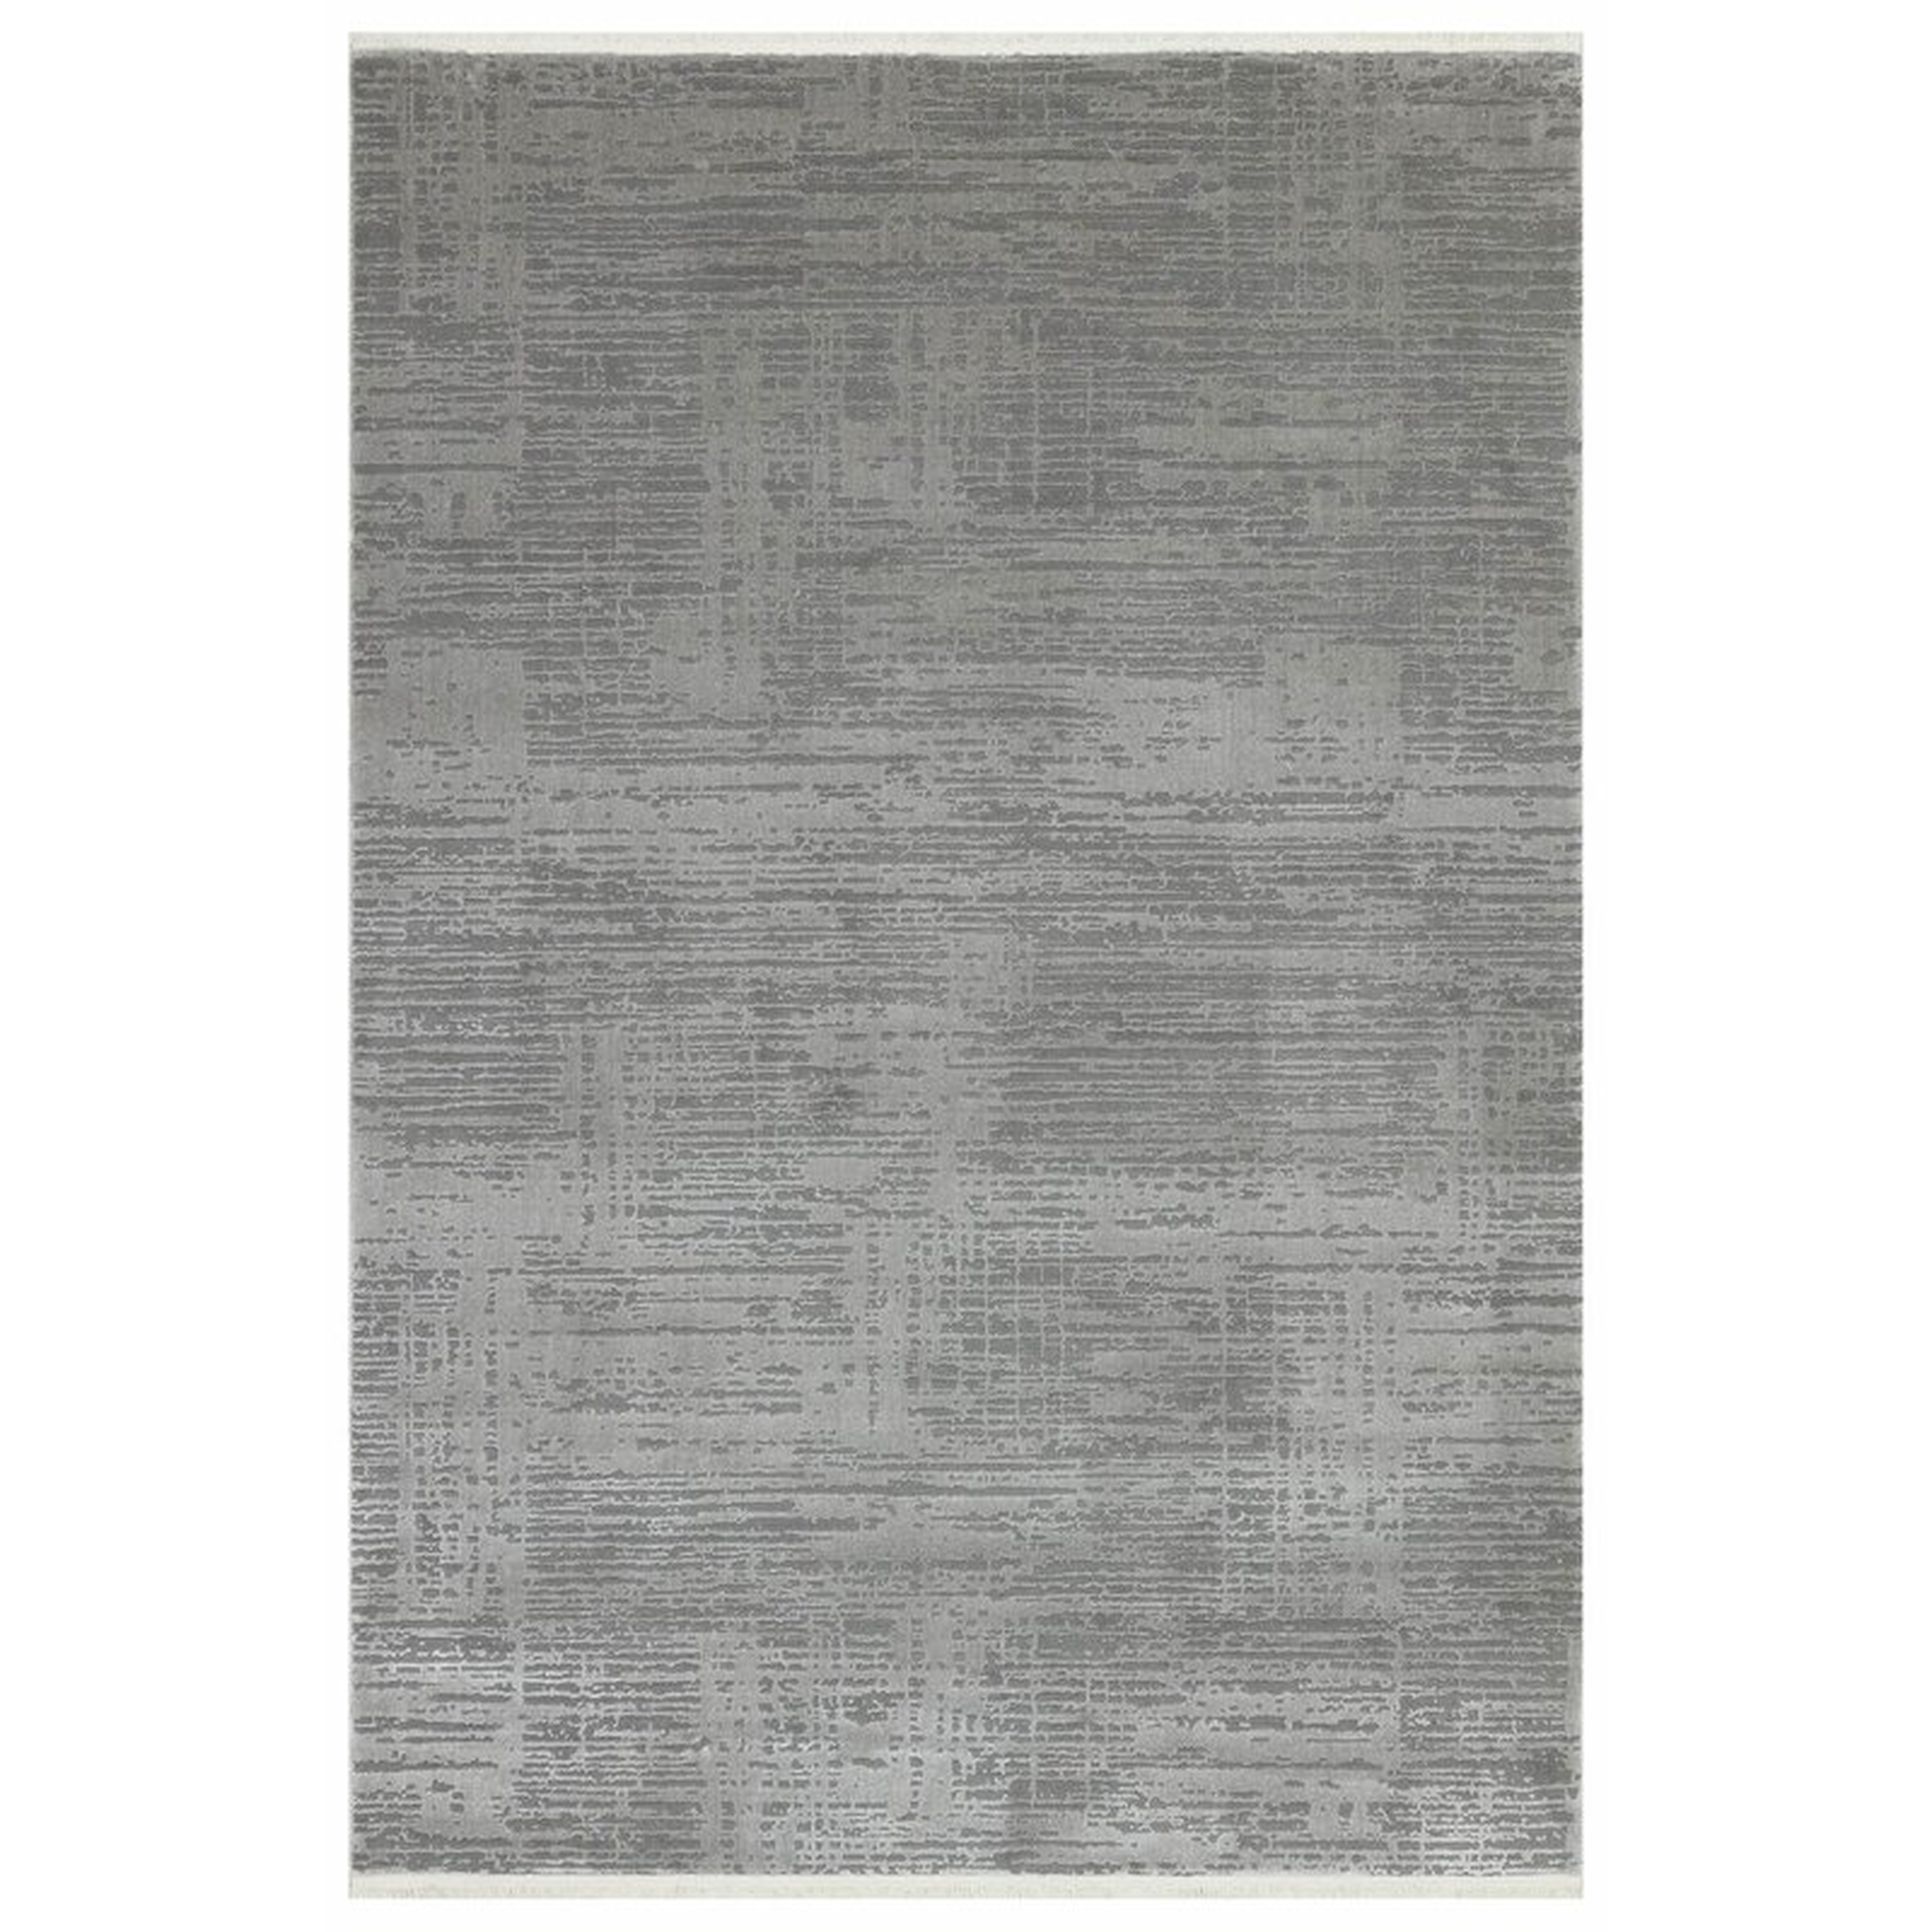 Bespoky Vintage Rugs Gray Area Rug Rug Size: Rectangle 4' x 5'11" - Perigold